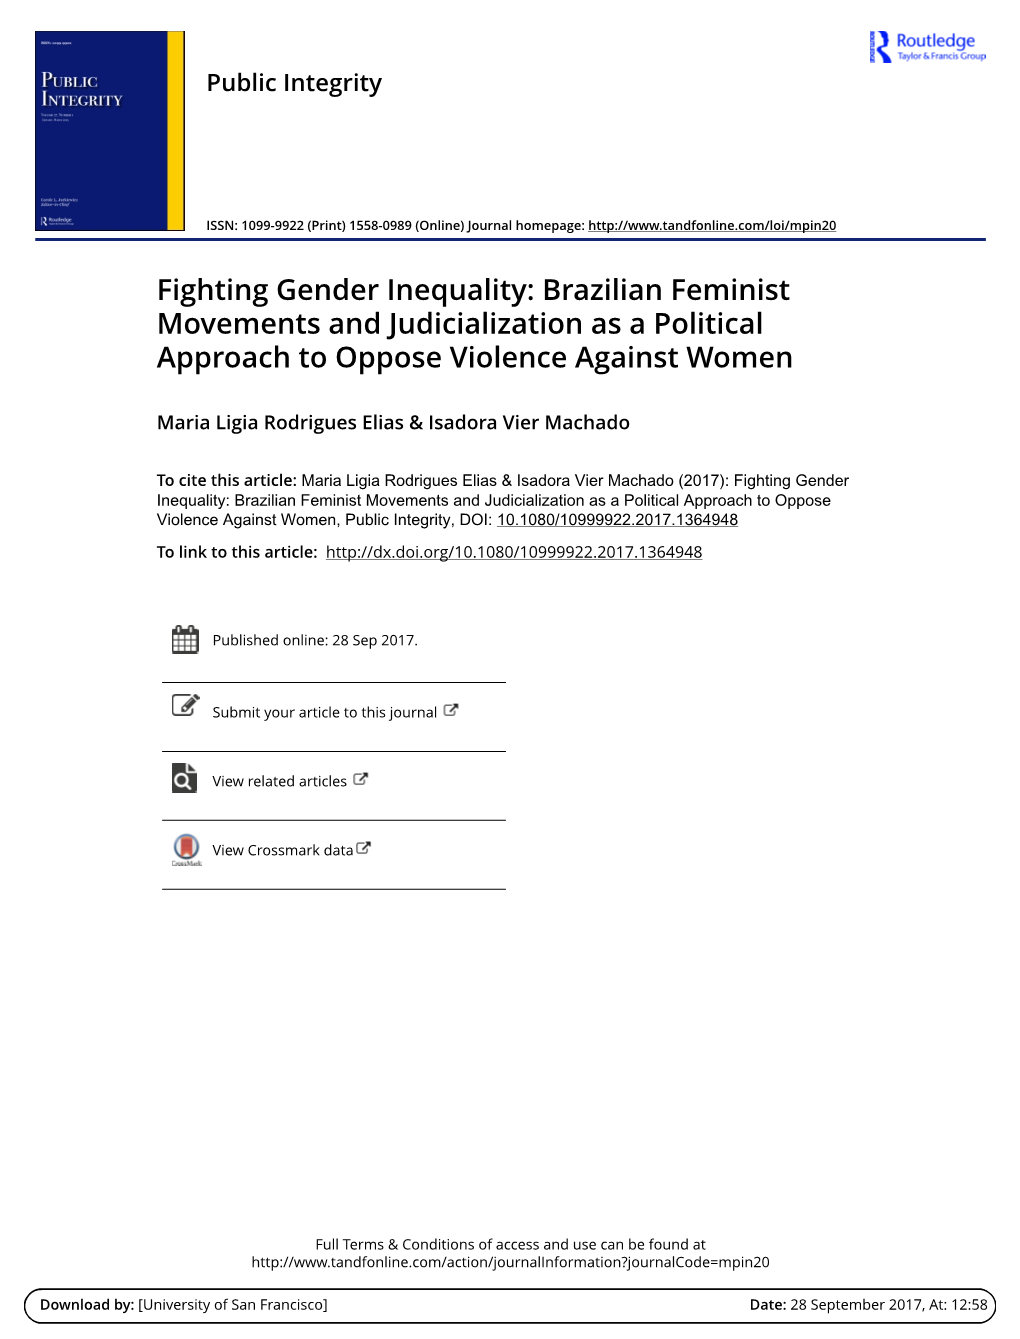 Fighting Gender Inequality: Brazilian Feminist Movements and Judicialization As a Political Approach to Oppose Violence Against Women